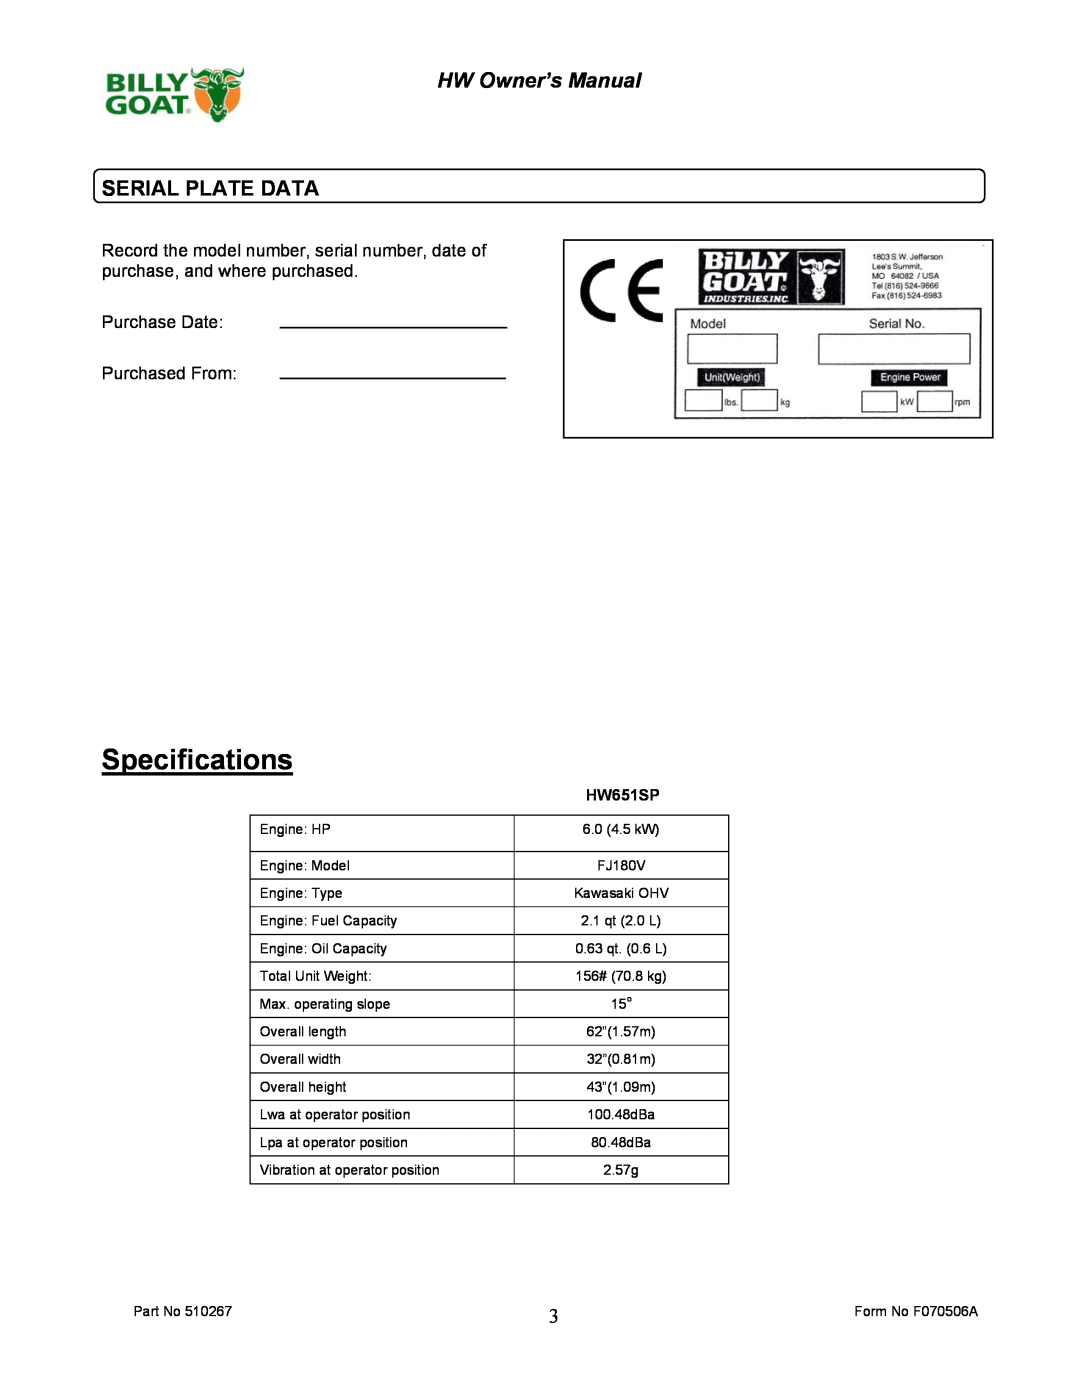 Billy Goat 510223 owner manual Serial Plate Data, Specifications, HW Owner’s Manual, HW651SP 